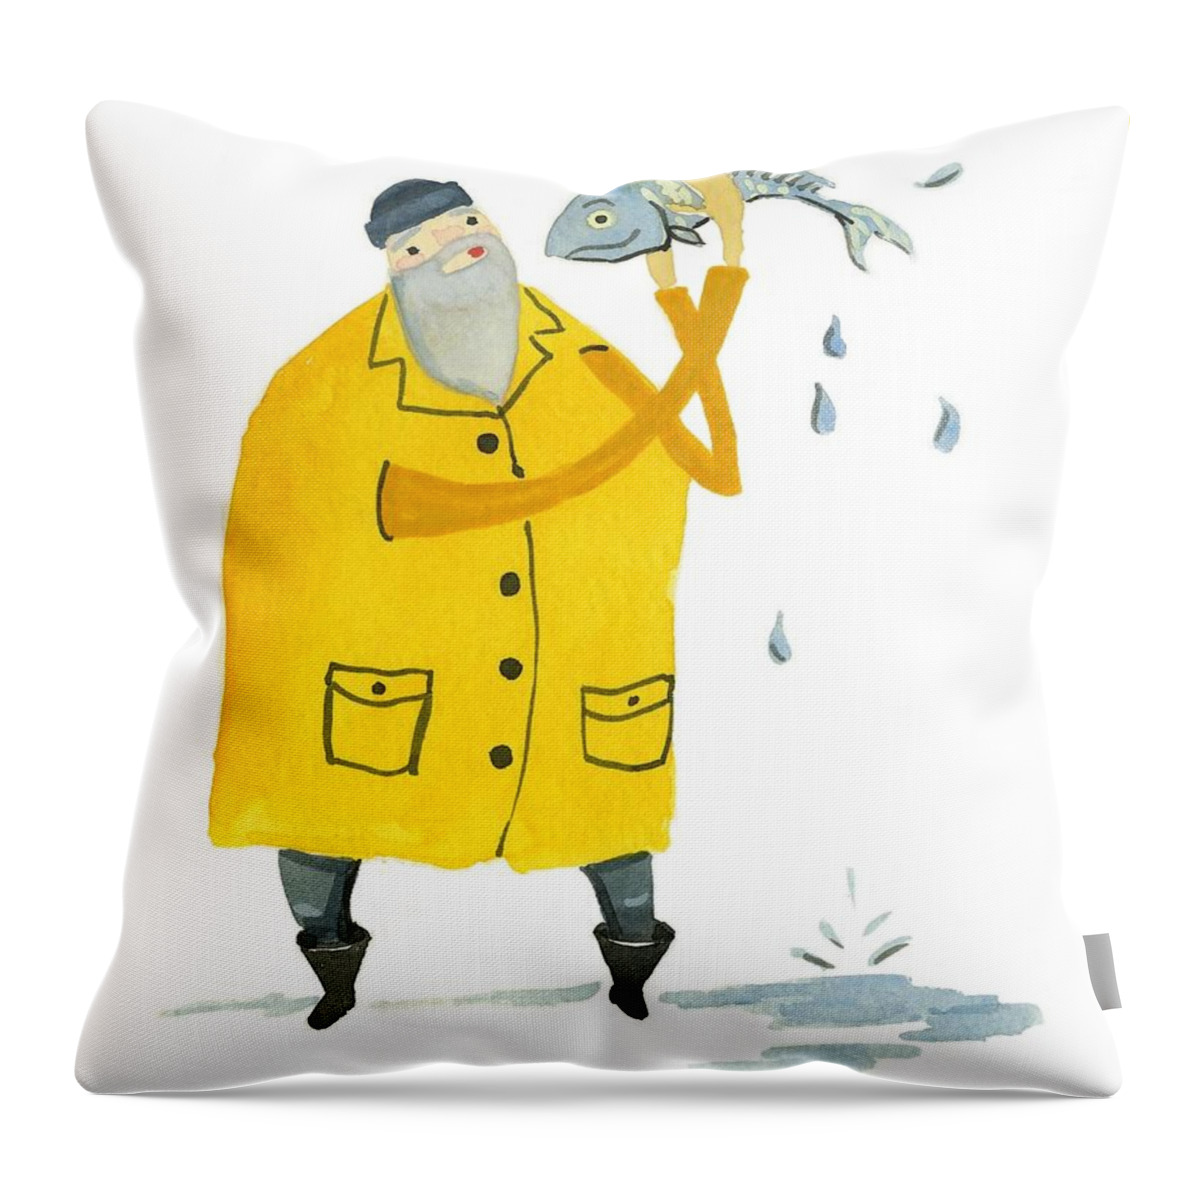 Fisherman Throw Pillow featuring the painting Fisherman by Leanne WILKES